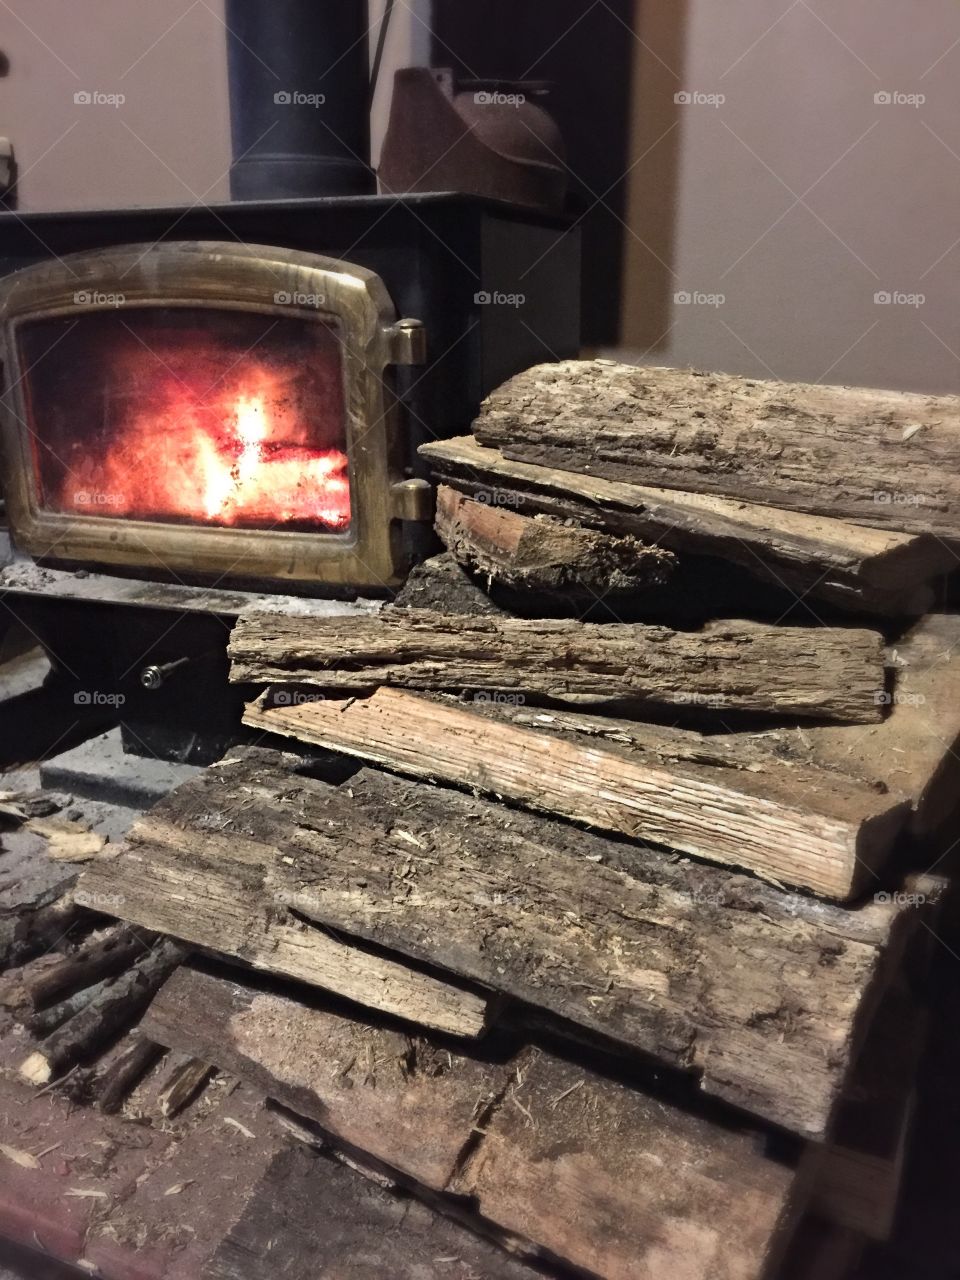 Getting our wood pile ready for winter.